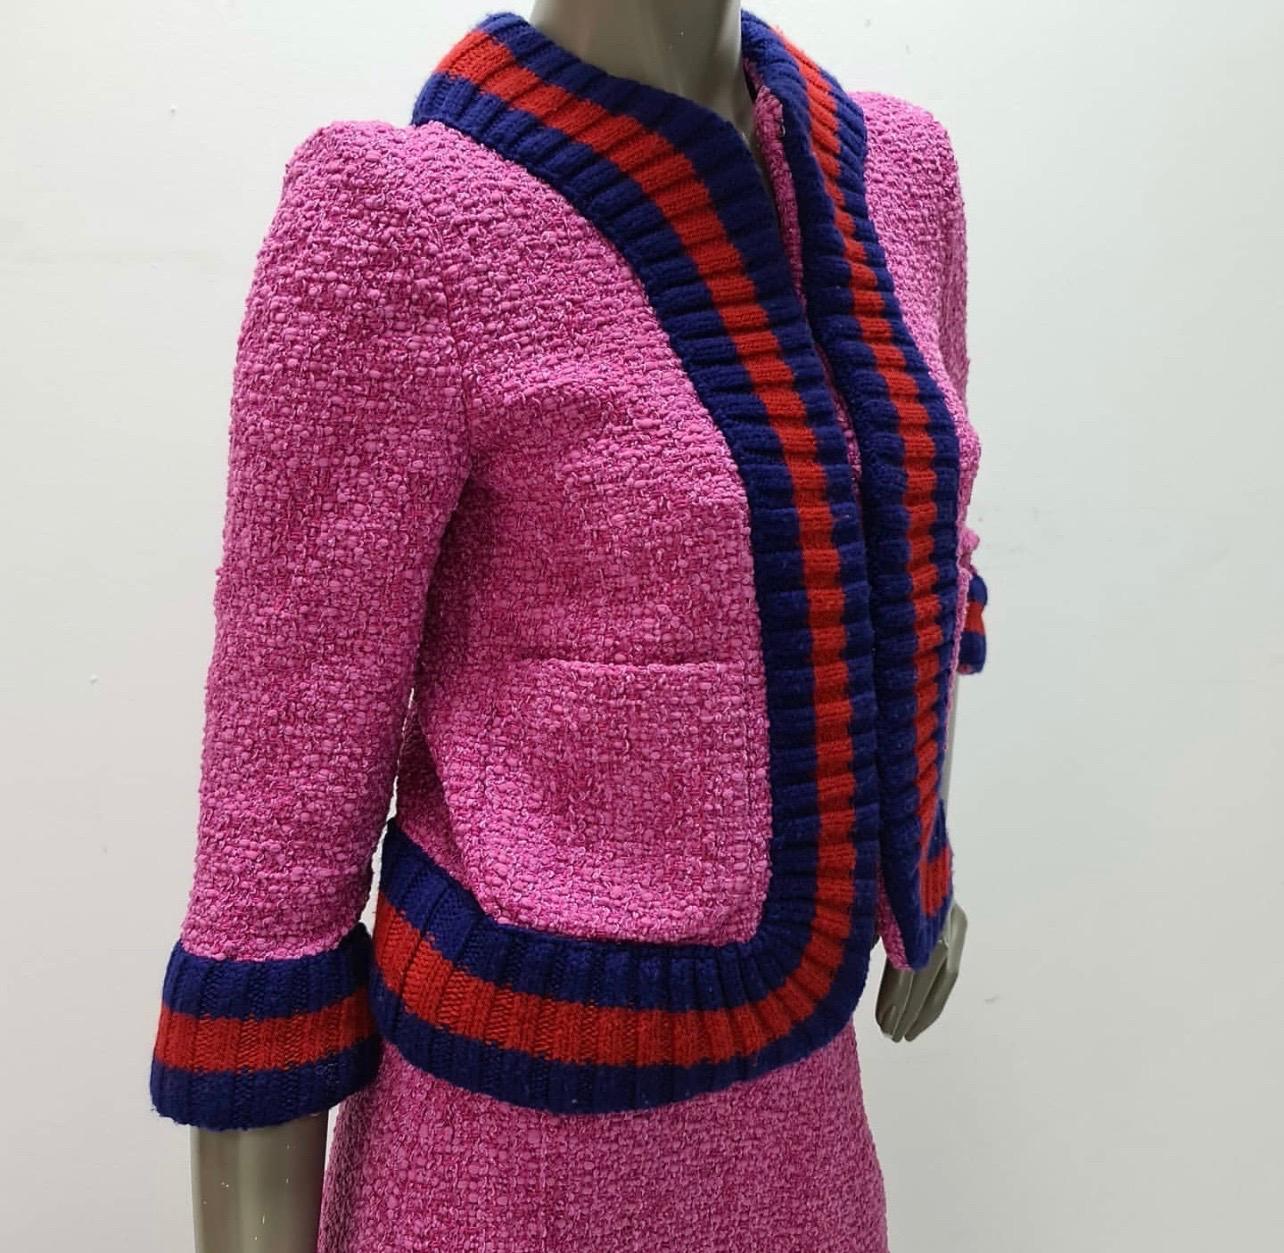 From the 2016 Collection. Pink, red and navy Gucci tweed skirt suit. Jacket features Web rib knit trim throughout, three-quarter sleeves, dual patch pockets at sides and concealed hook closures at front. Skirt features Web rib knit trim at waist and